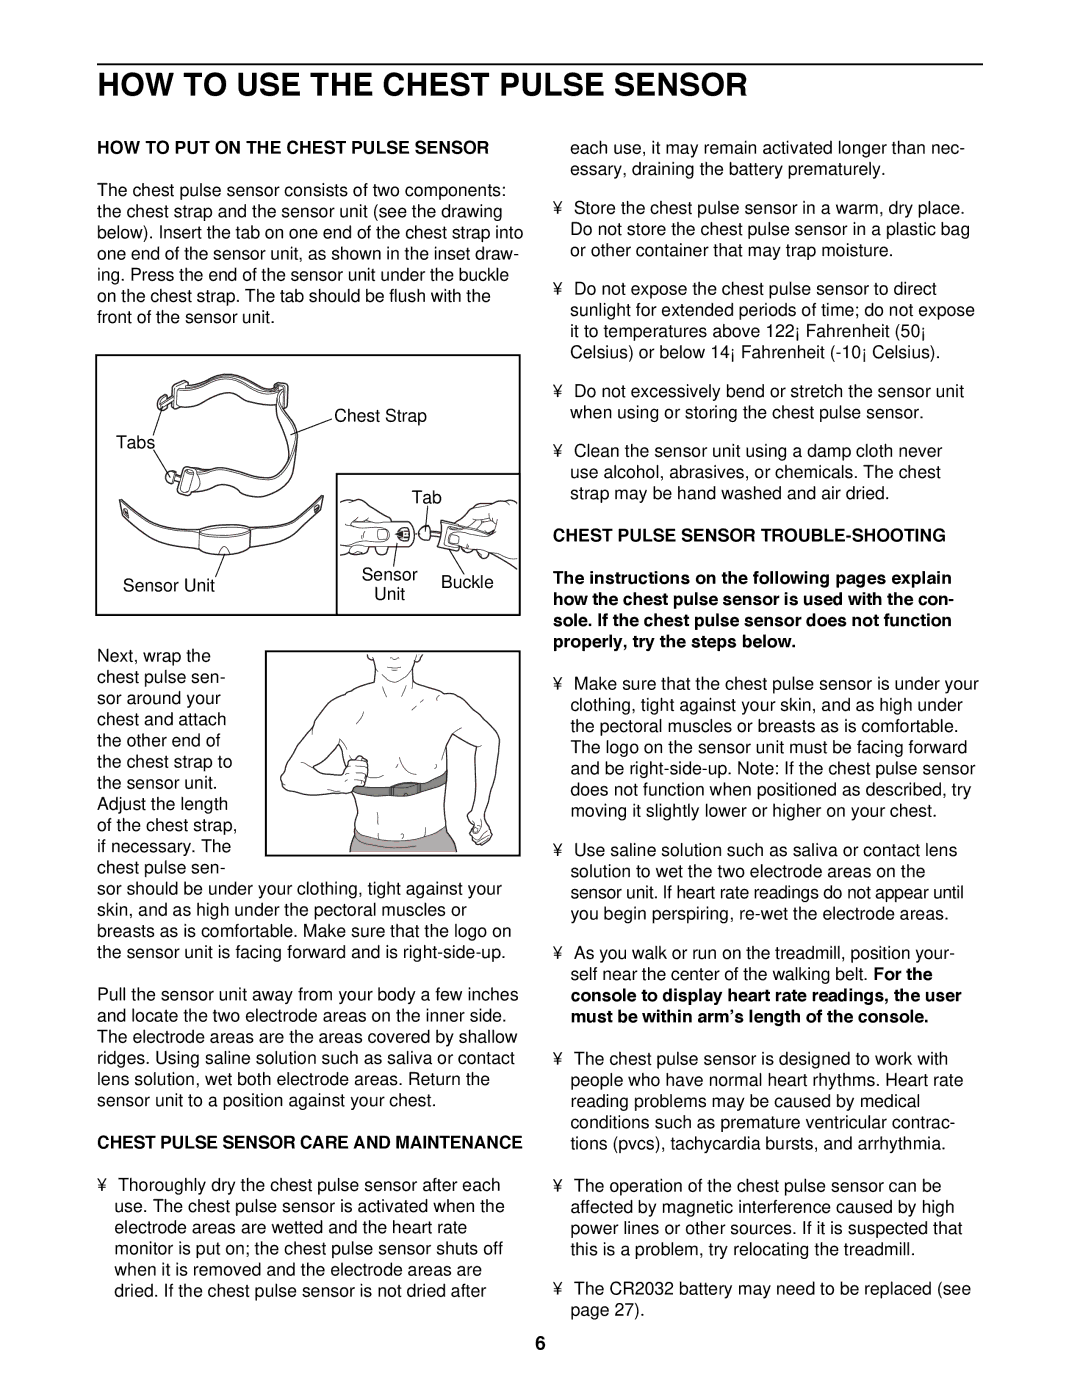 Healthrider HRTL12994 manual HOW to USE the Chest Pulse Sensor, HOW to PUT on the Chest Pulse Sensor 